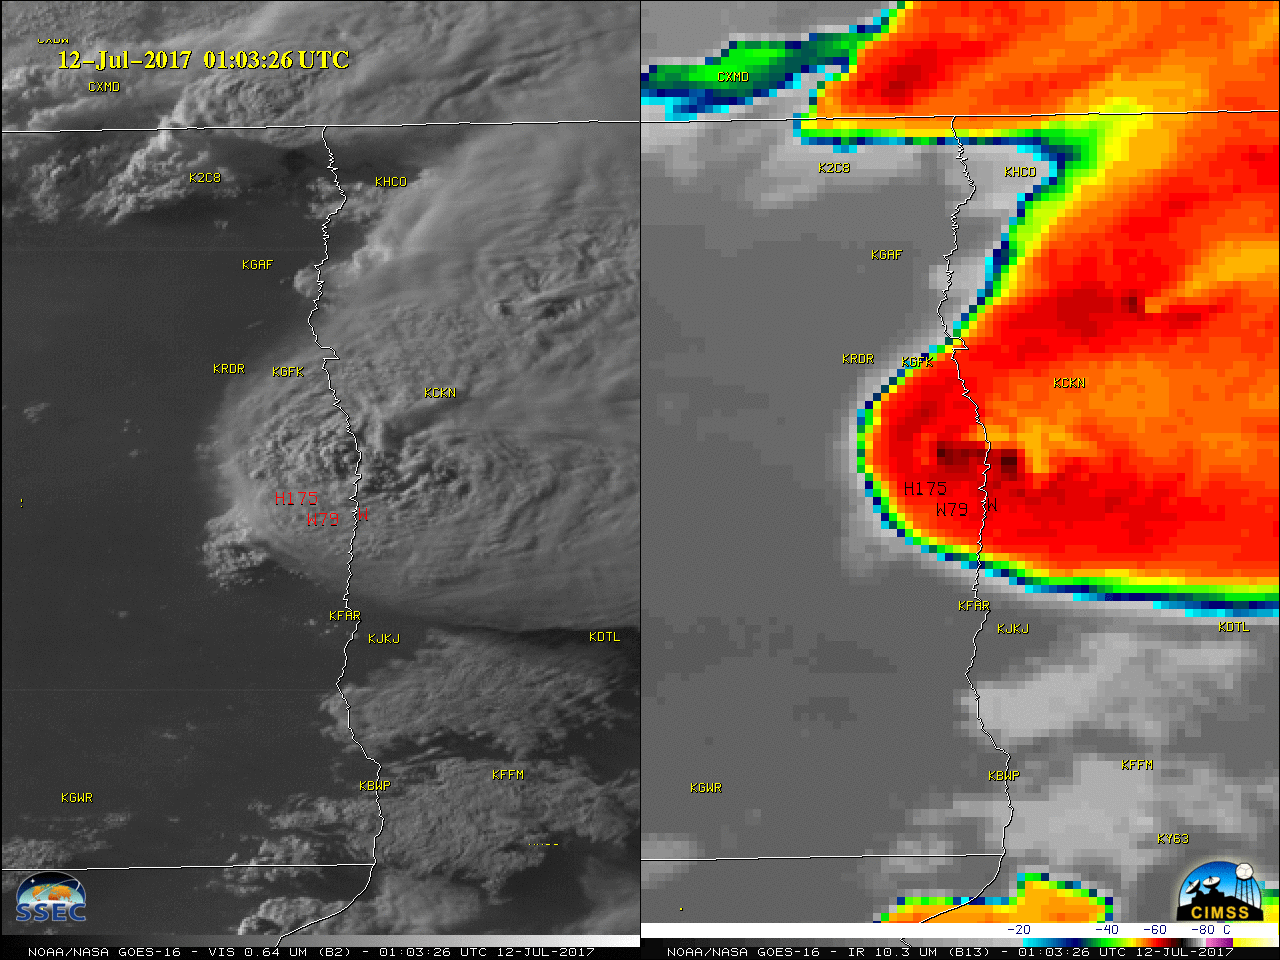 GOES-16 Visible (0.6 µm, left) and Infrared Window (10.3 µm, right) images, with SPC storm reports plotted in red (on Visible) and black (on Infrared) [click to play MP4 animation]